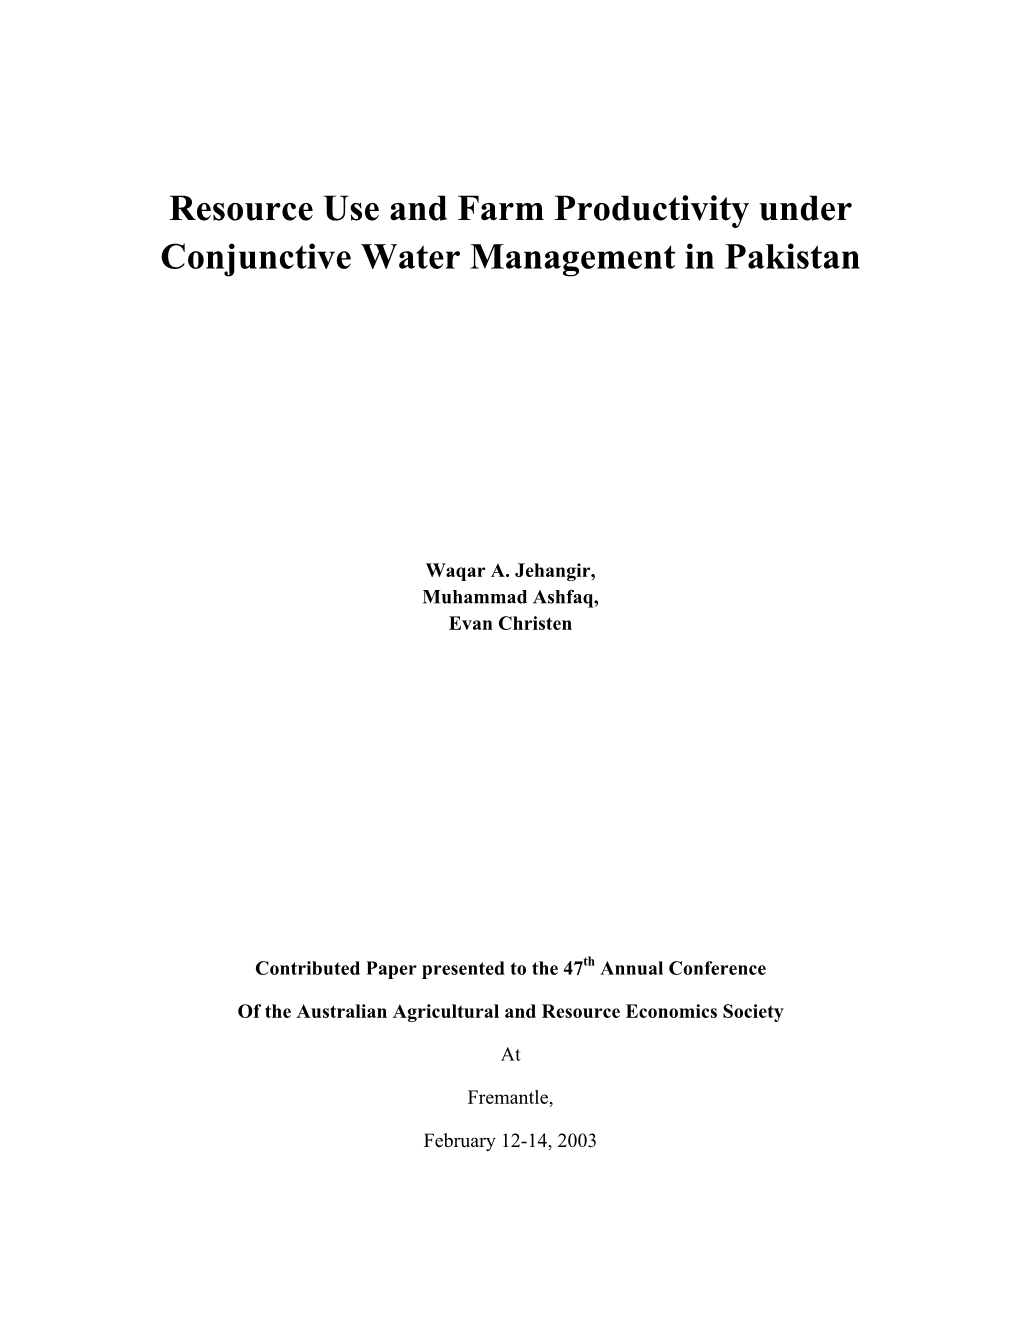 Resource Use and Farm Productivity Under Conjunctive Water Management in Pakistan